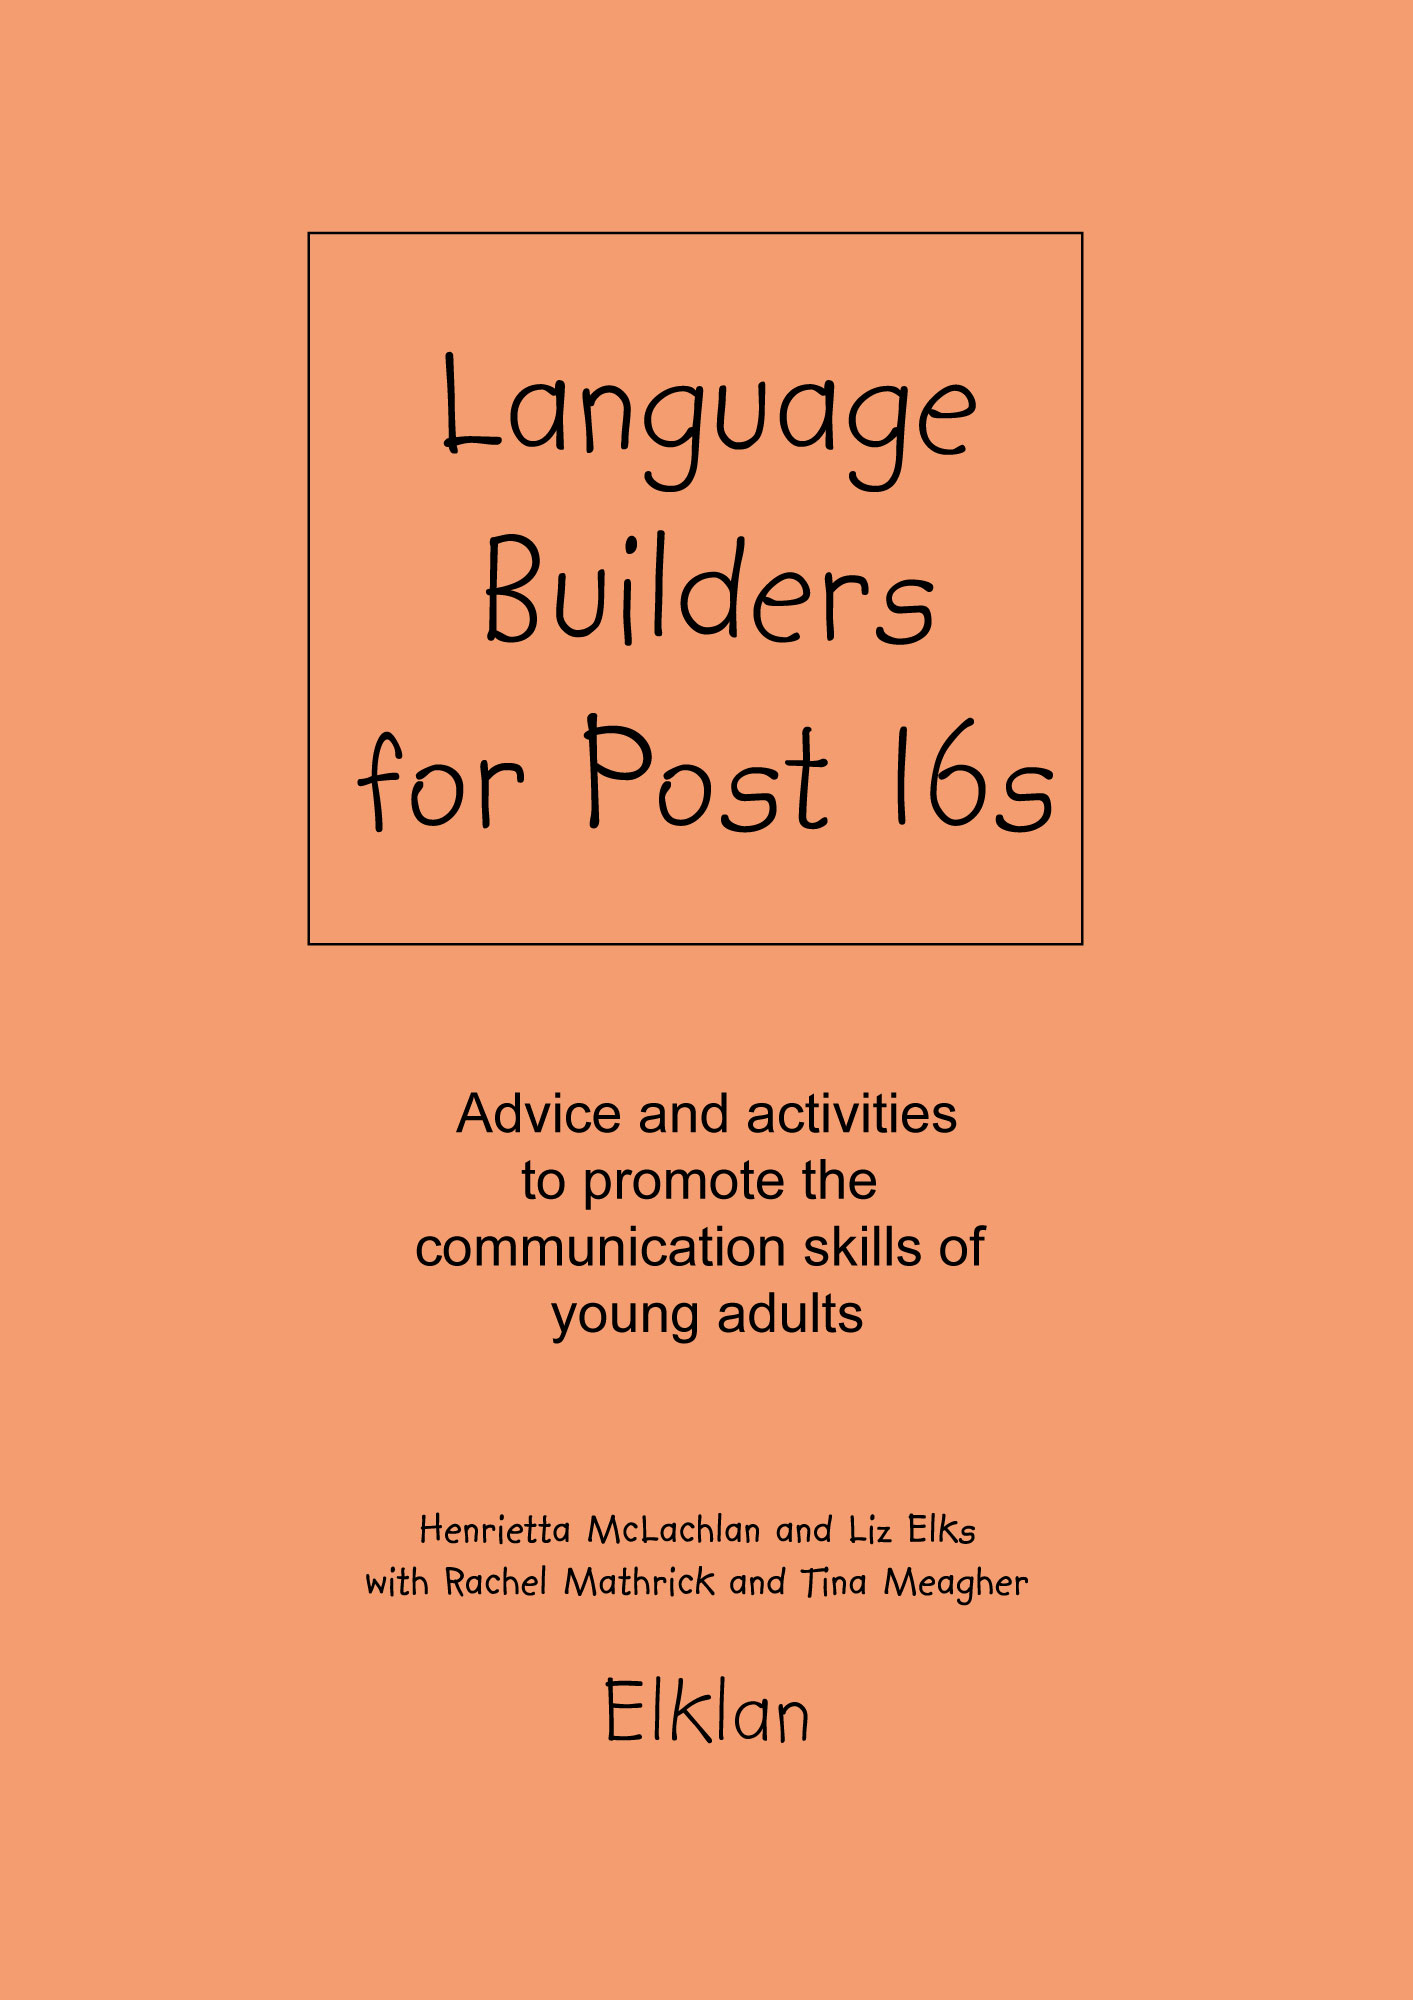 Language Builders for Post 16s paperback - previous (2010) version